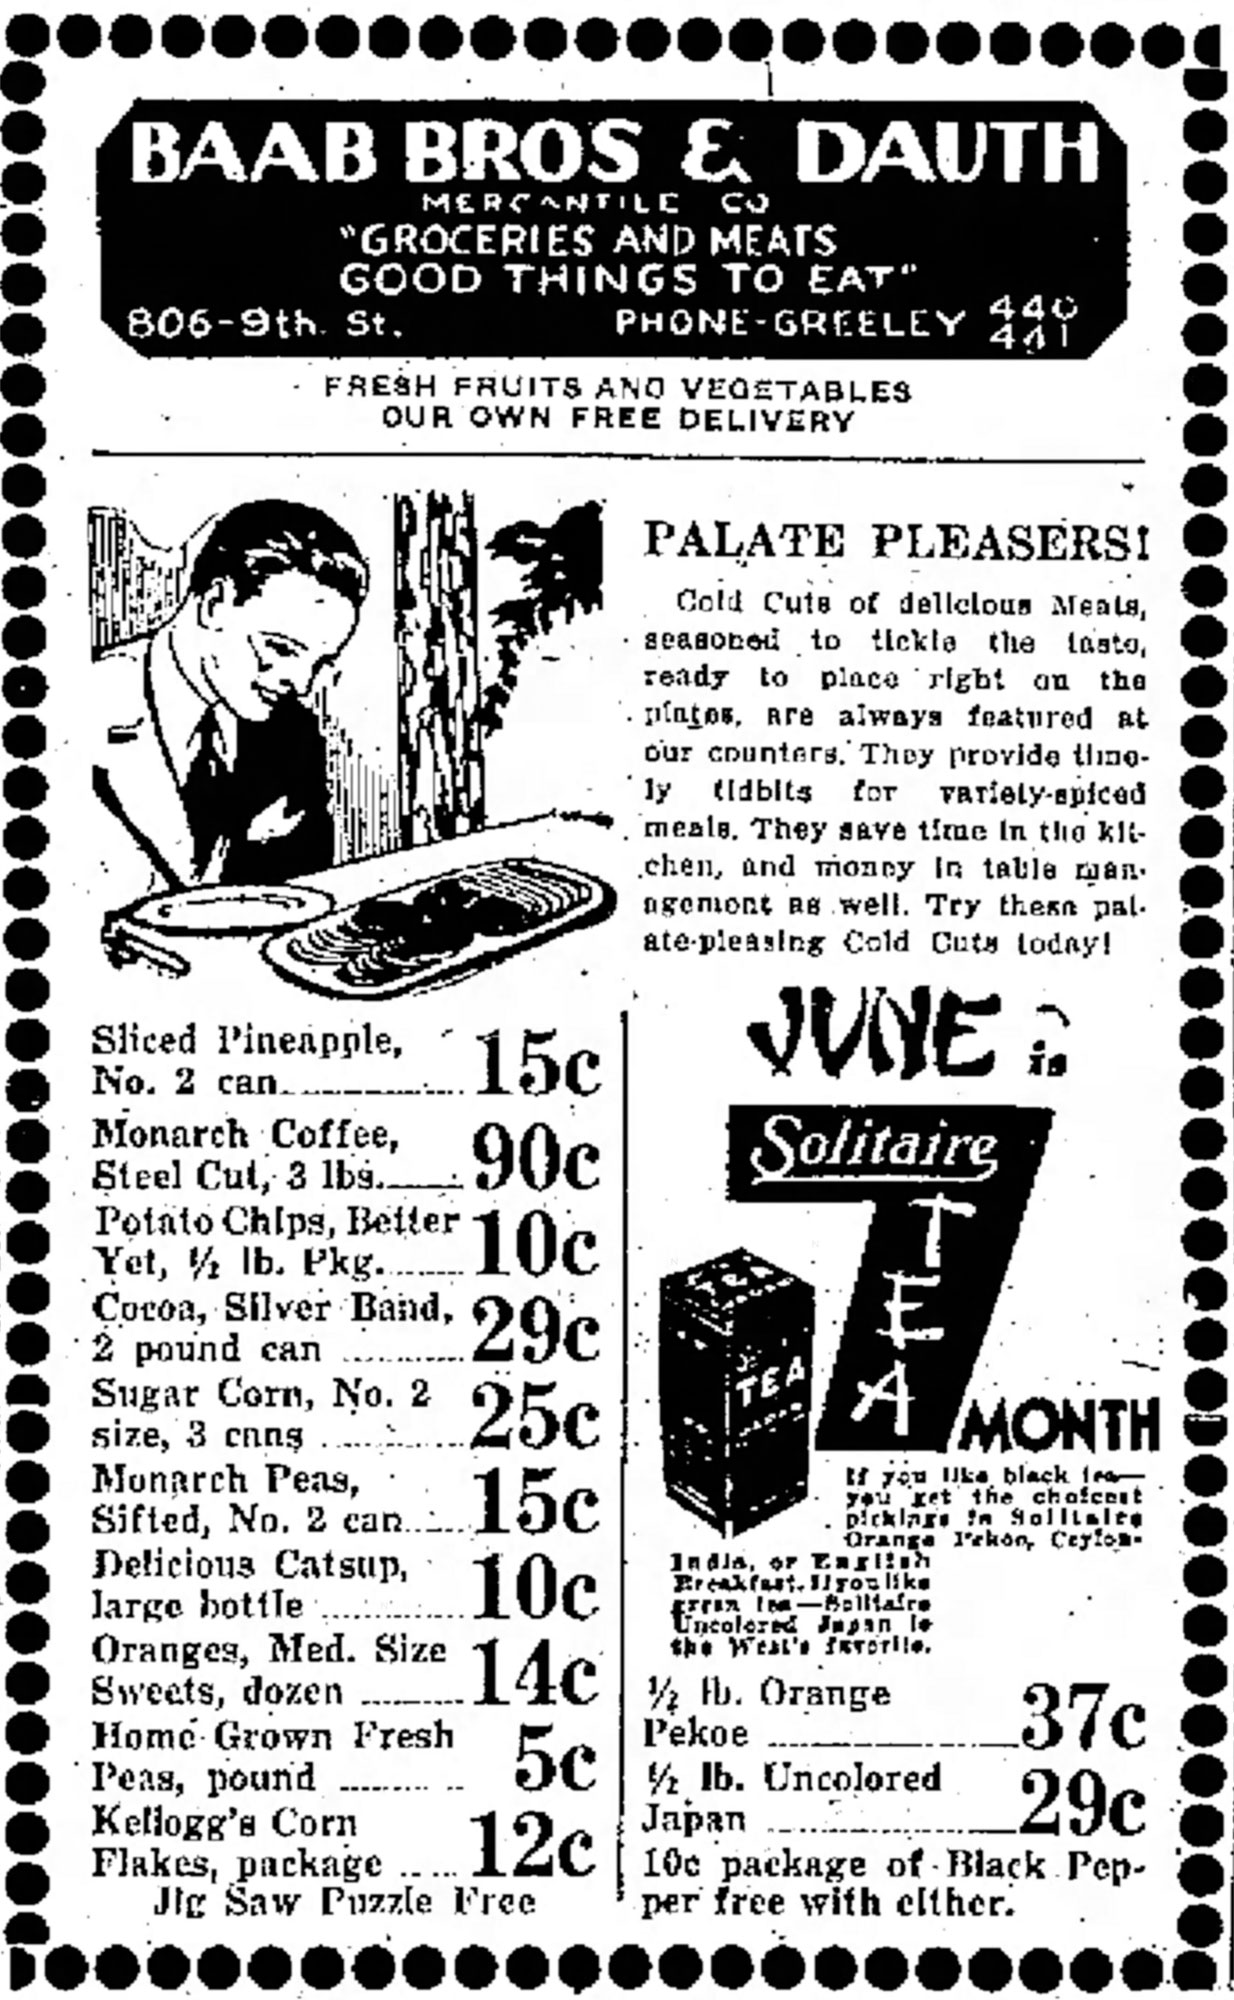 Dauth Family Archive - 1933-06-16 - Greeley Daily Tribune - Baab Bros and Dauth Advertisement